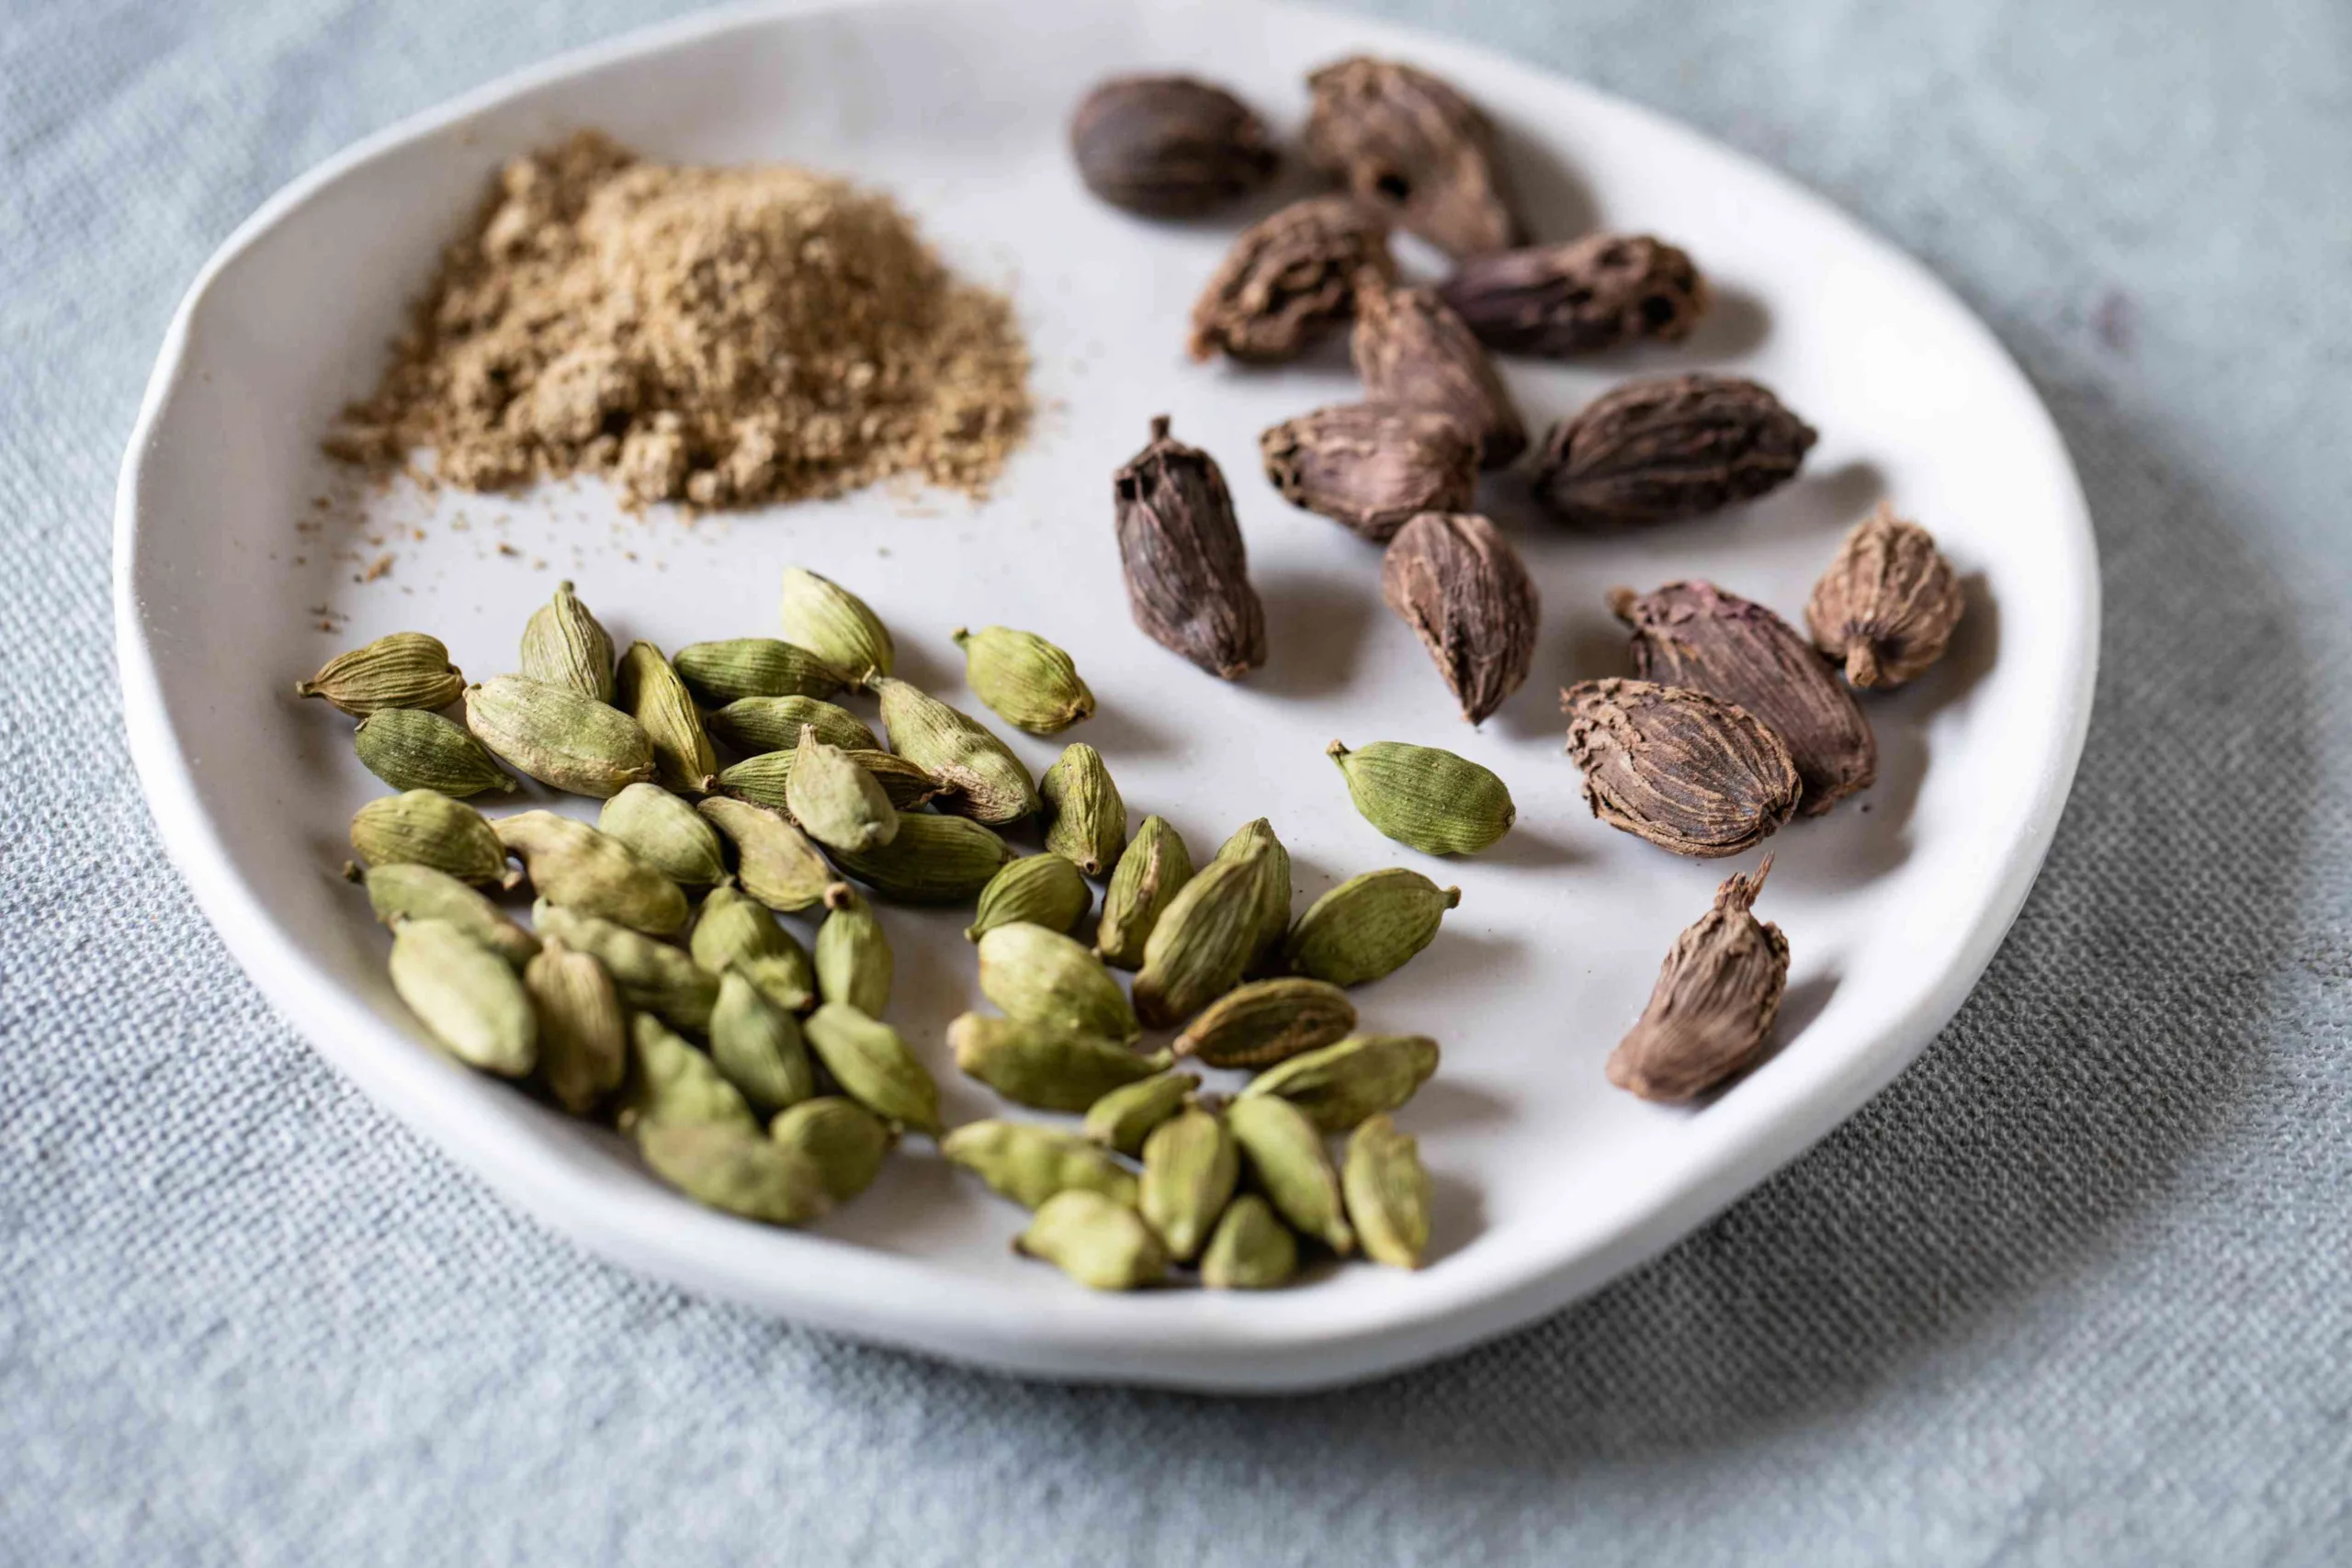 Cardamom: A Treasured Culinary Spice with Ancient Health Benefits